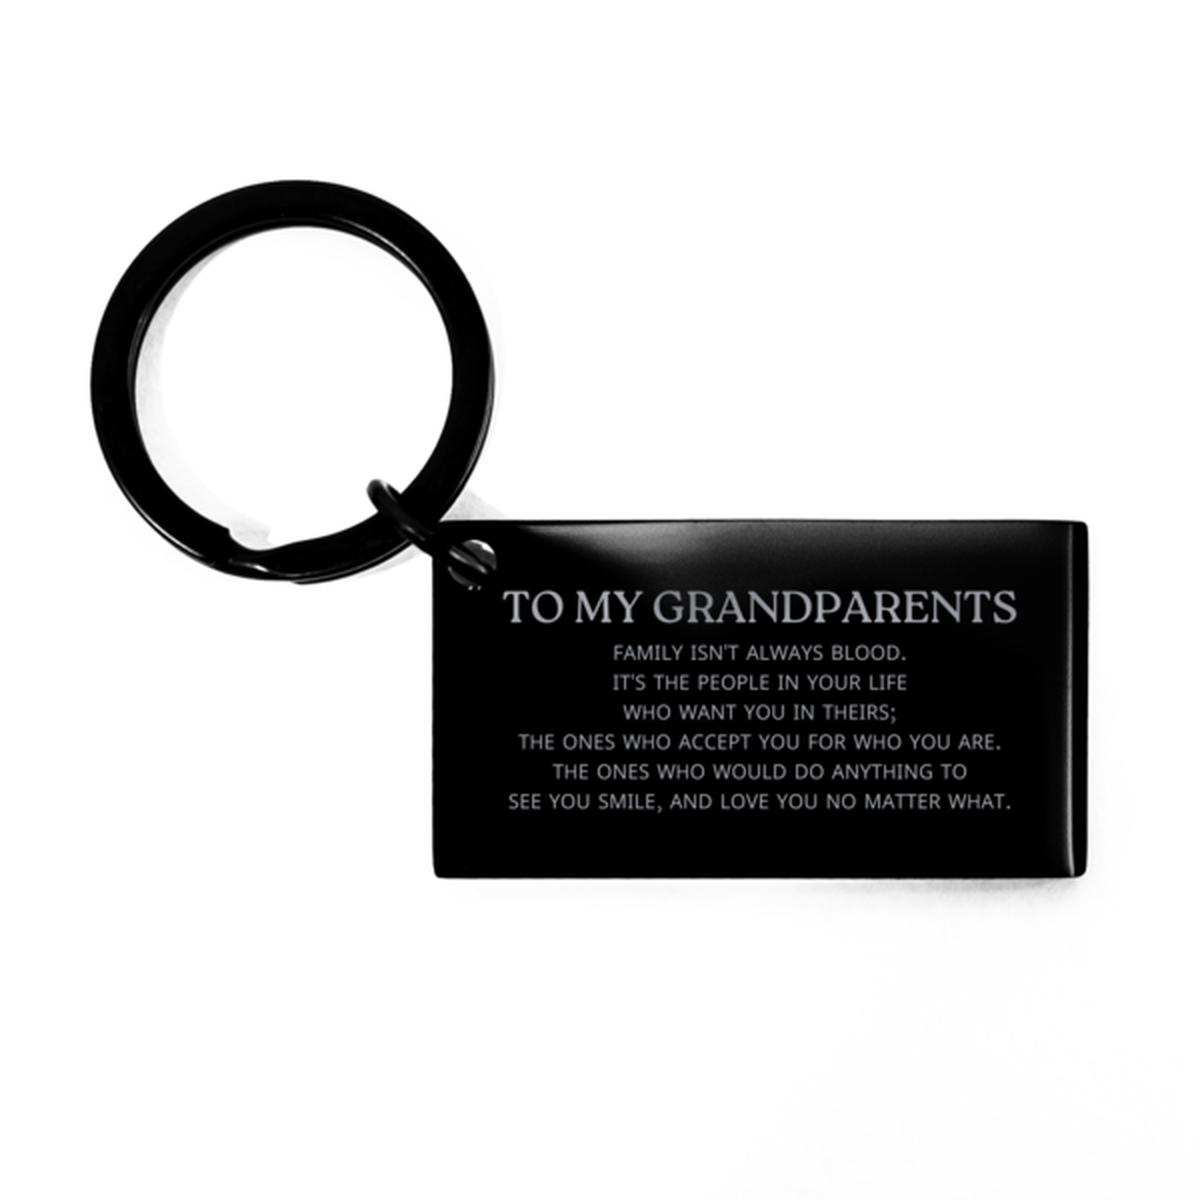 To My Grandparents Gifts, Family isn't always blood, Grandparents Keychain, Birthday Christmas Unique Present For Grandparents